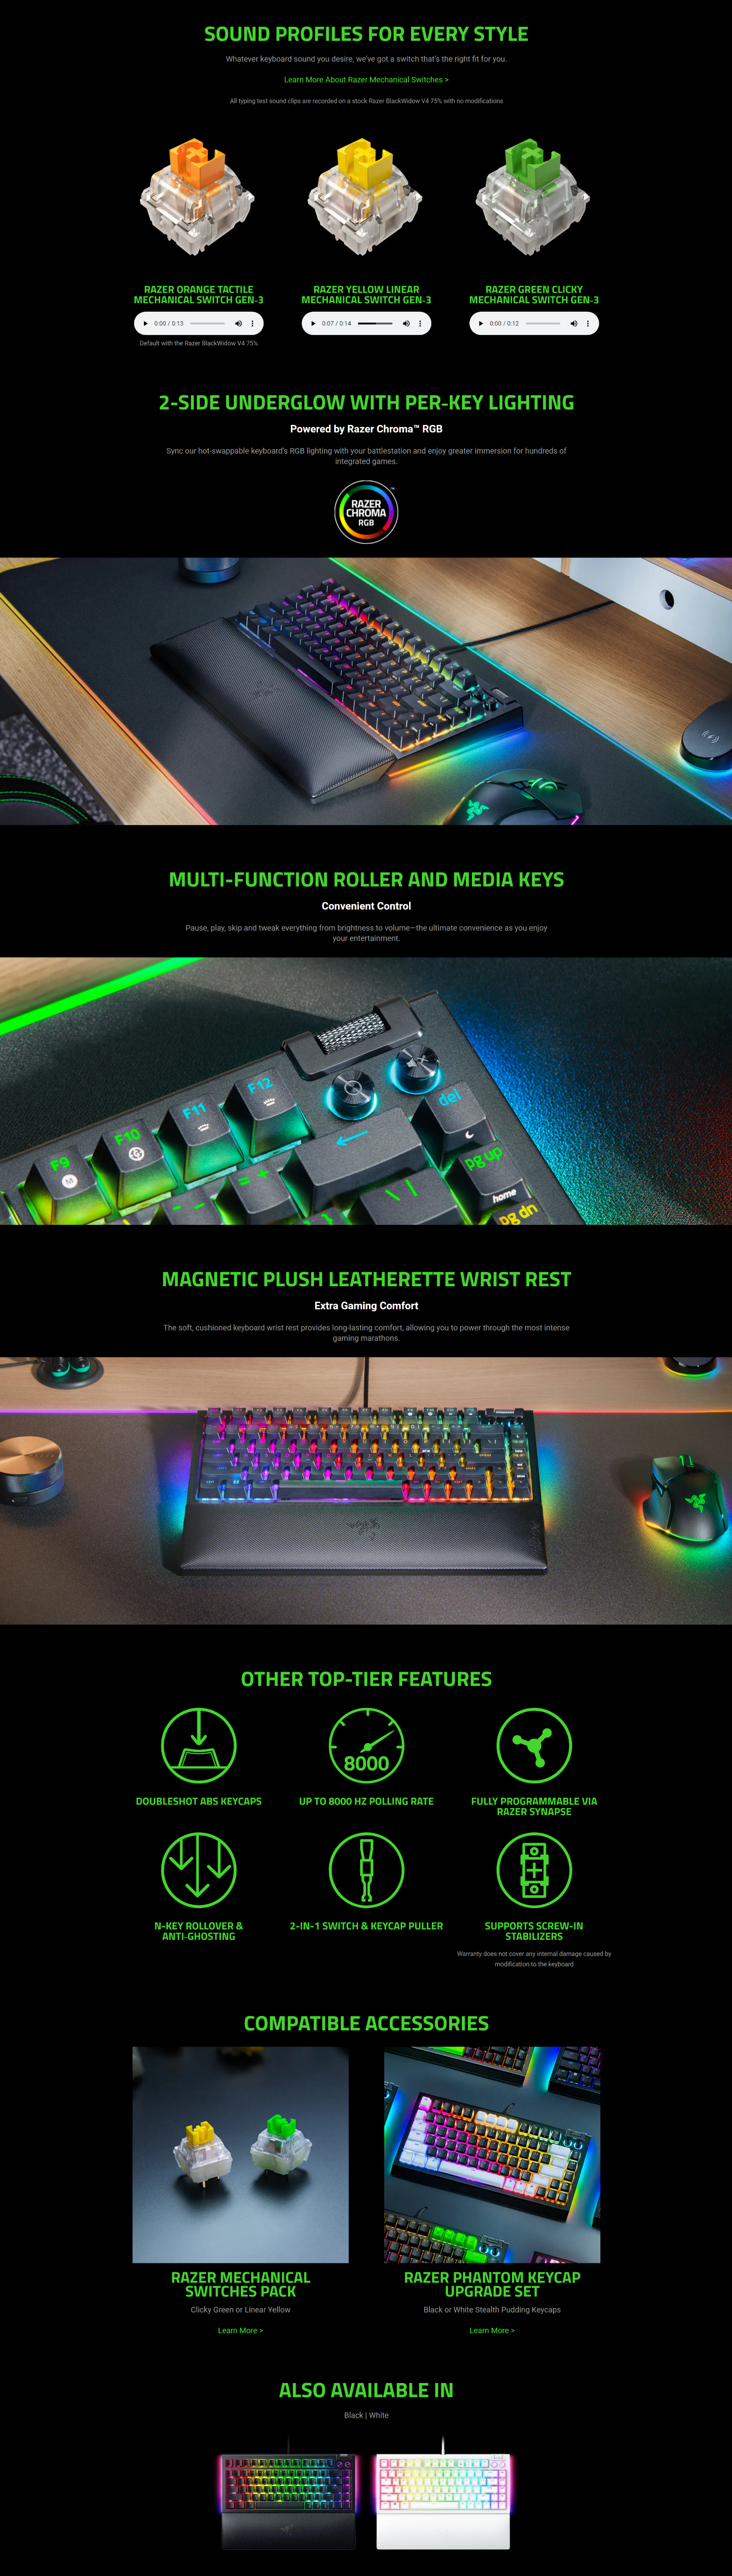 A large marketing image providing additional information about the product Razer BlackWidow V4 75% - Compact Mechanical Gaming Keyboard (White) - Additional alt info not provided